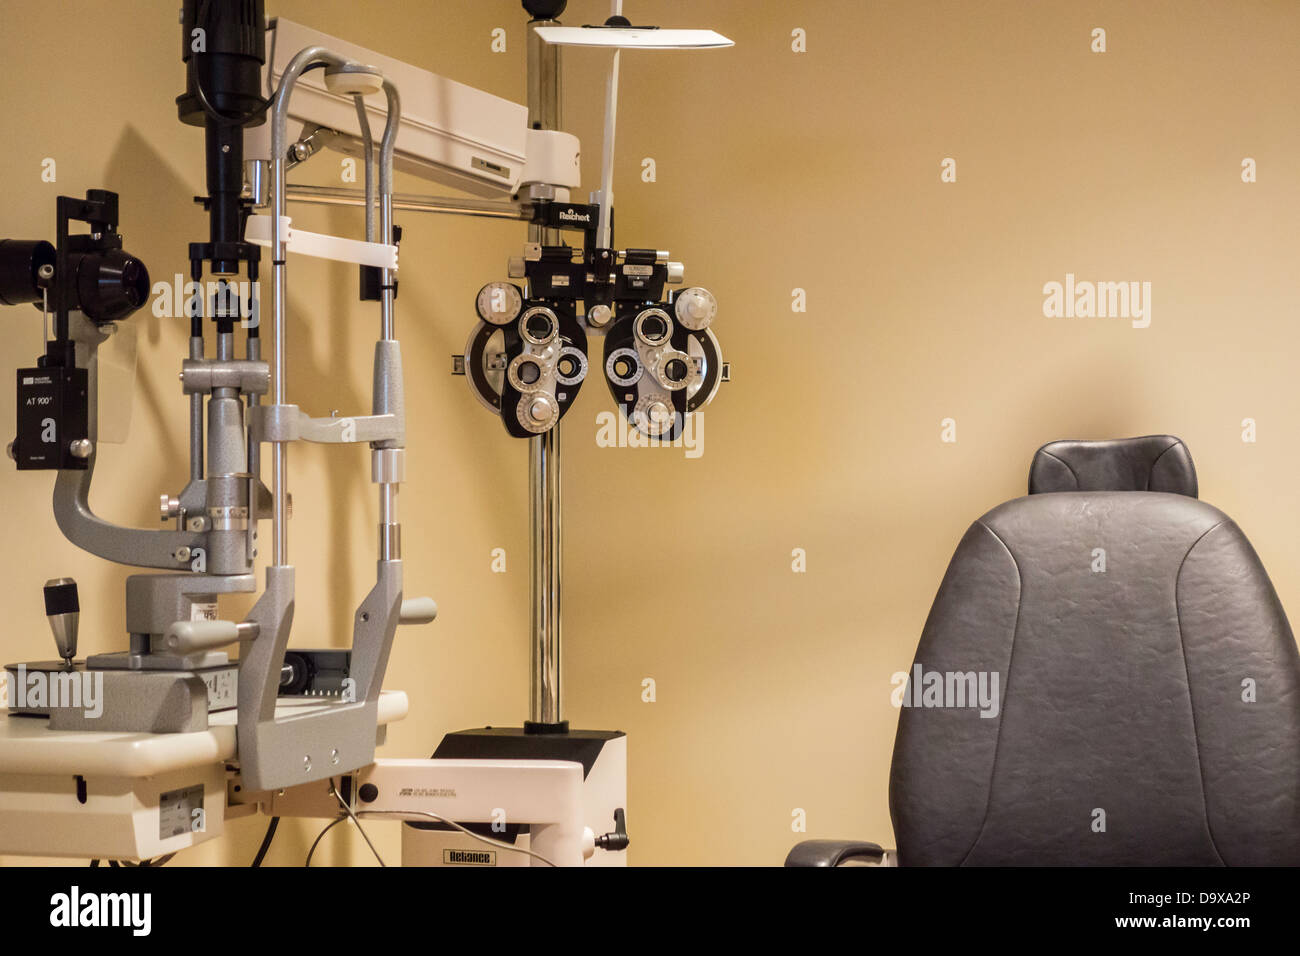 A foreopter, slit lamp and patient chair in an exam room for eye care. Oklahoma City, Oklahoma, USA. Stock Photo